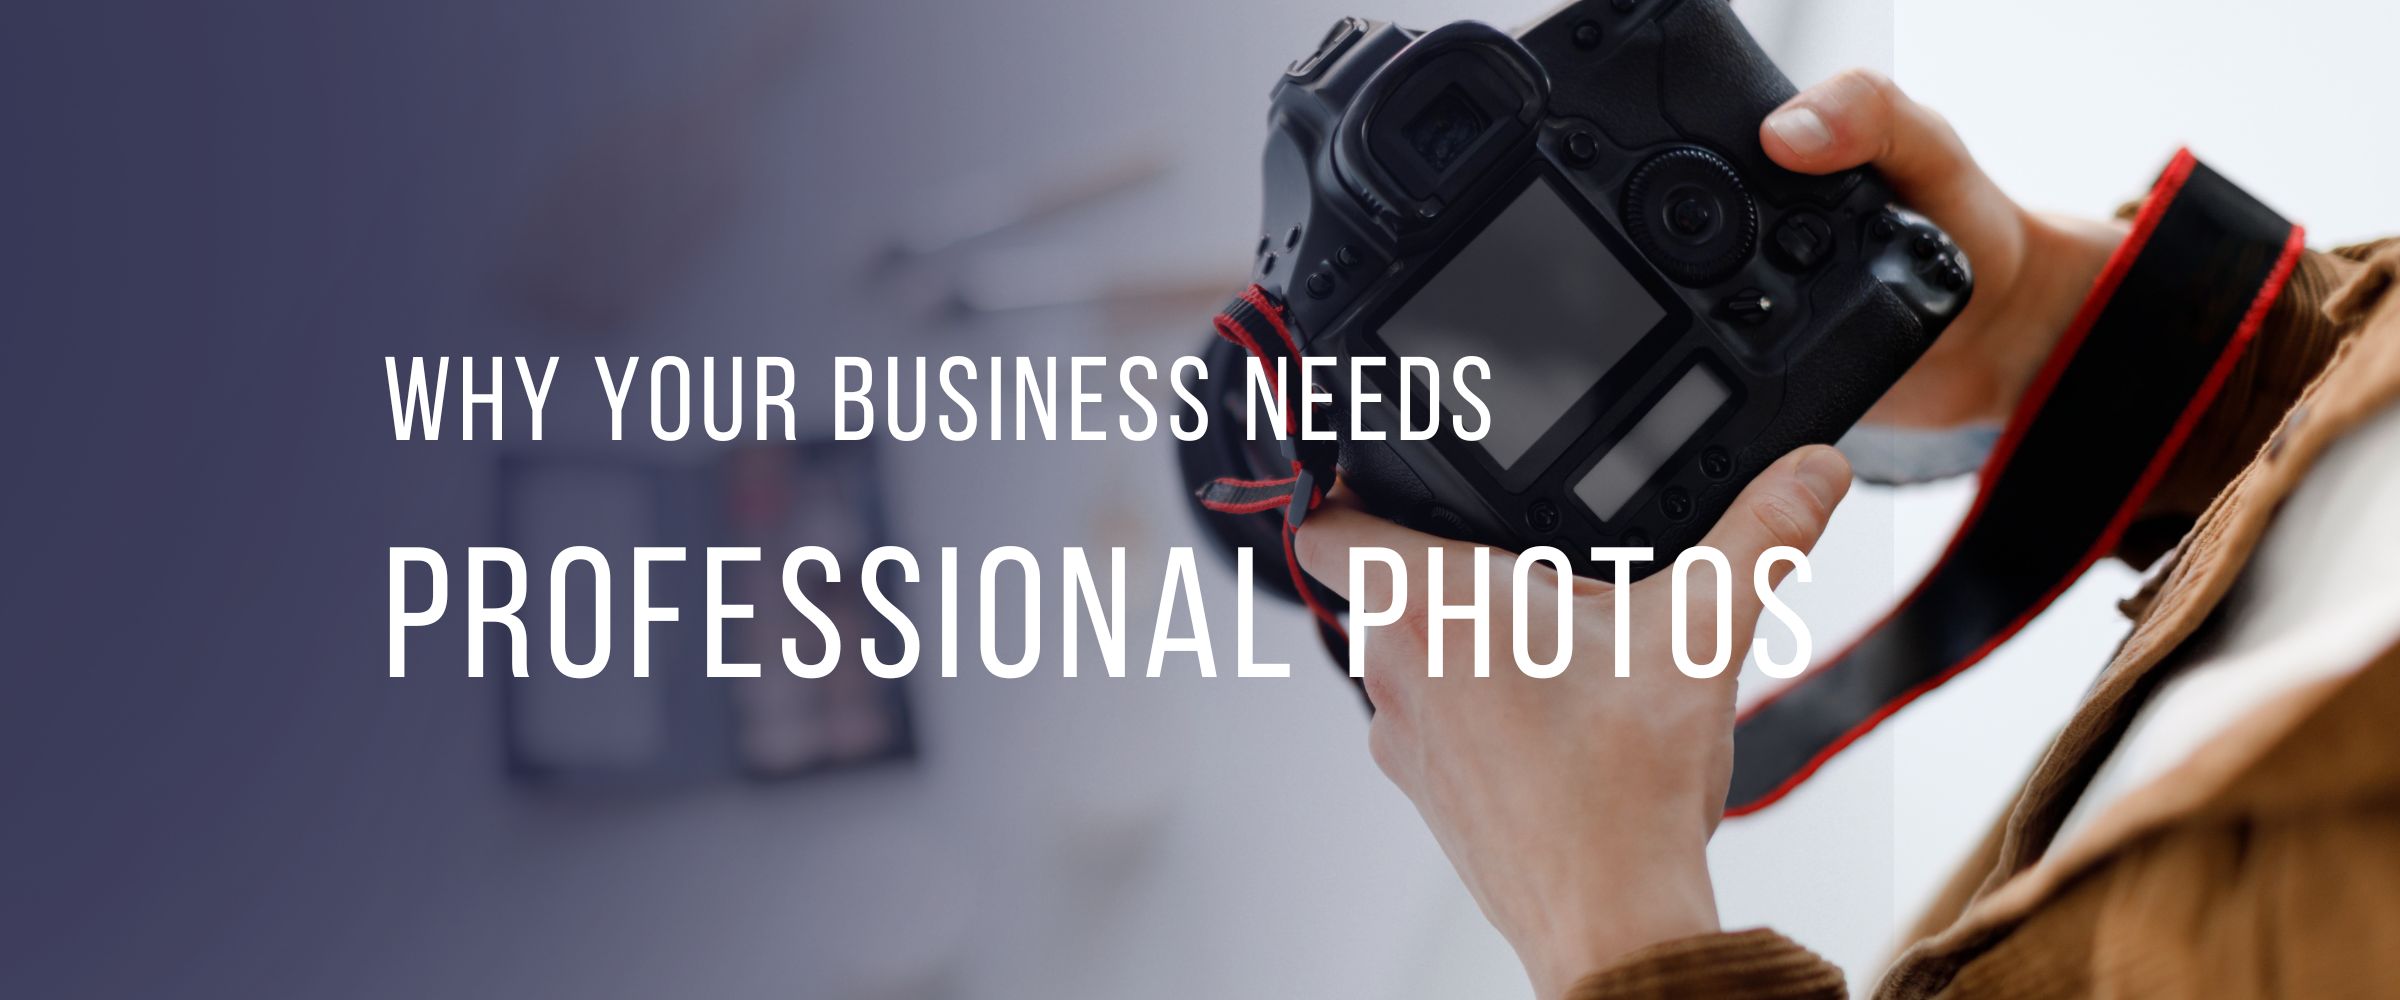 Why Your Business Needs Professional Photos 